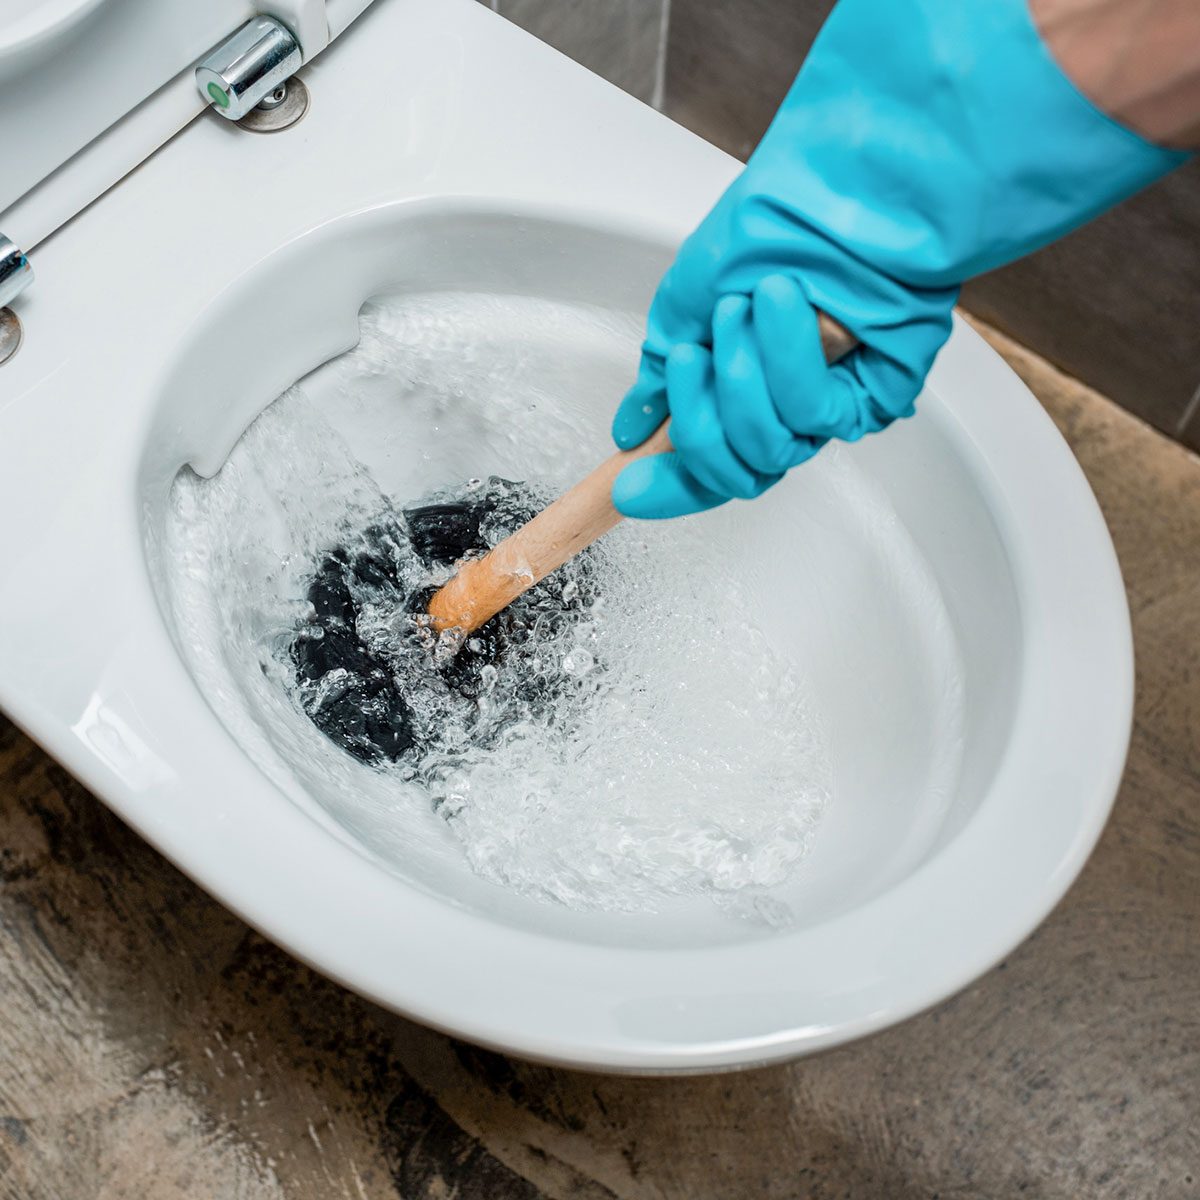  plumber using plunger in toilet bowl during flushing in modern restroom with grey tile